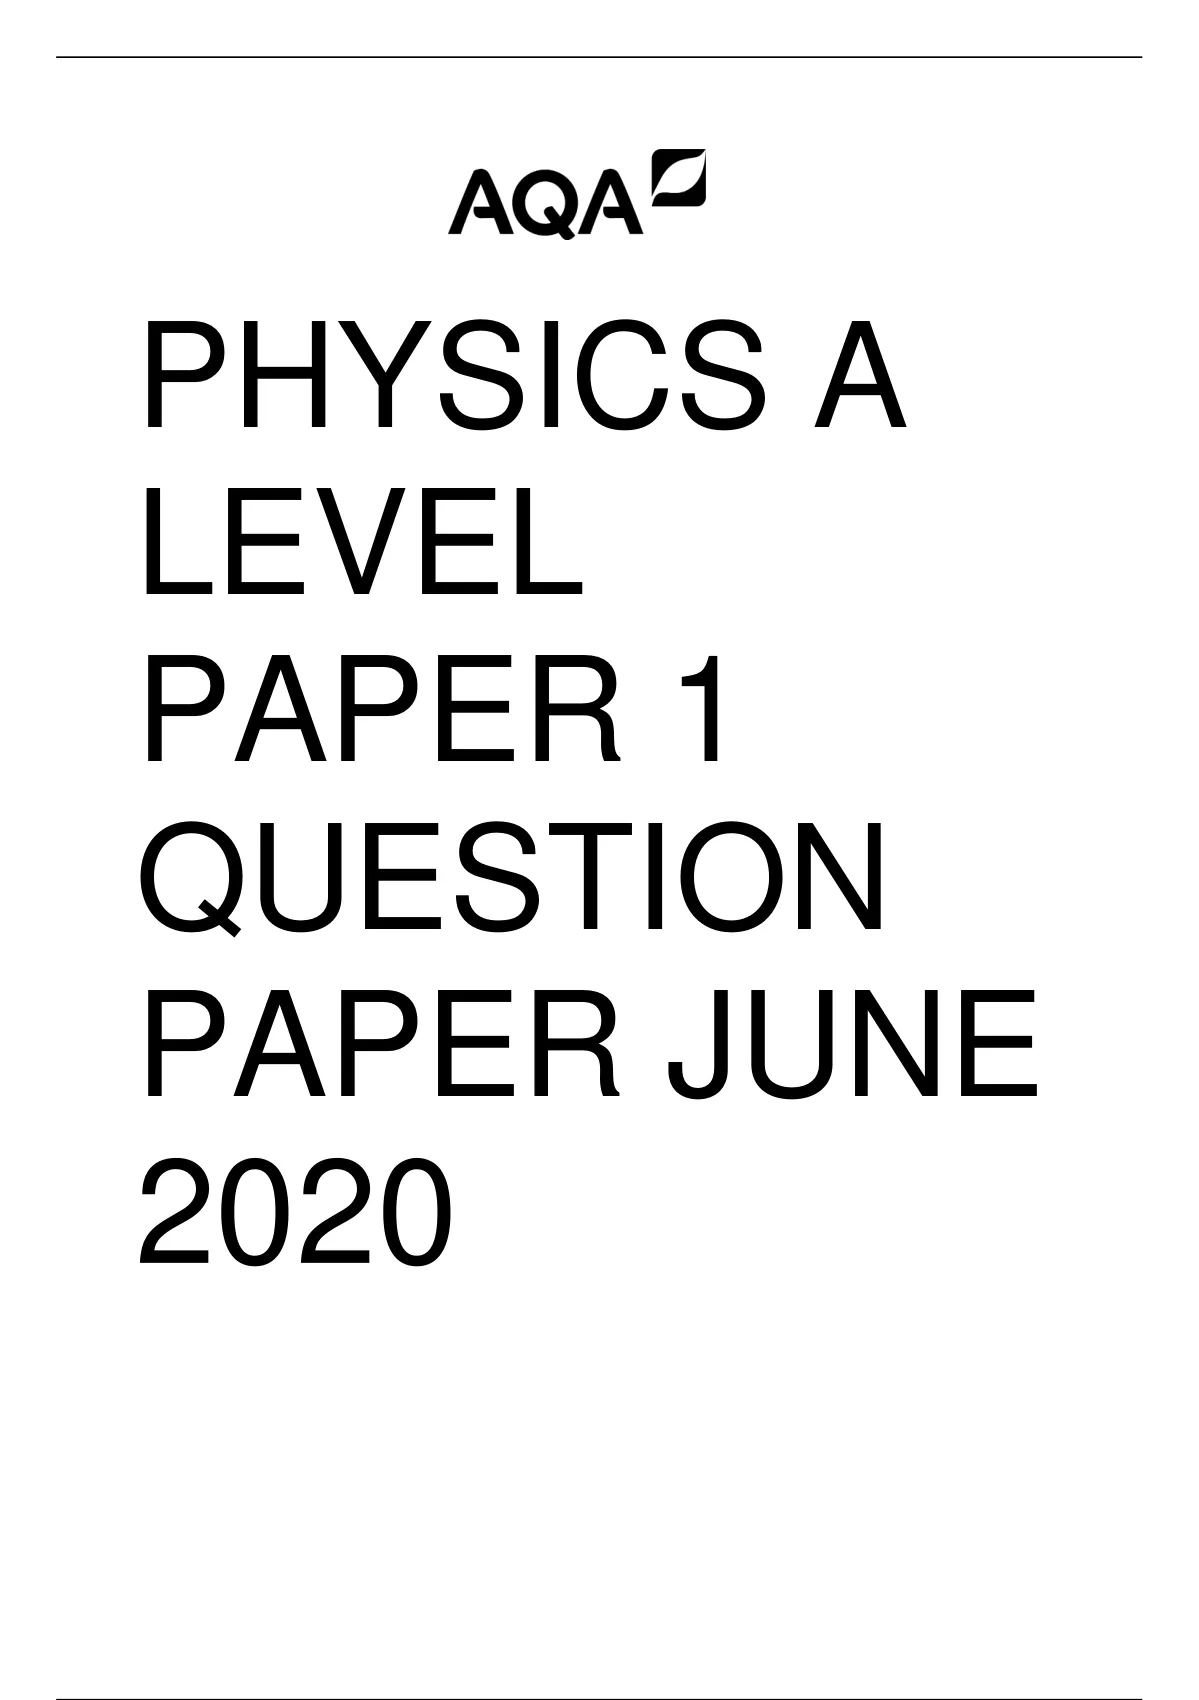 All Aqa A Level 2020 Physics Complete Paper1paper2 And Paper 3 All Components Include With Both 2951